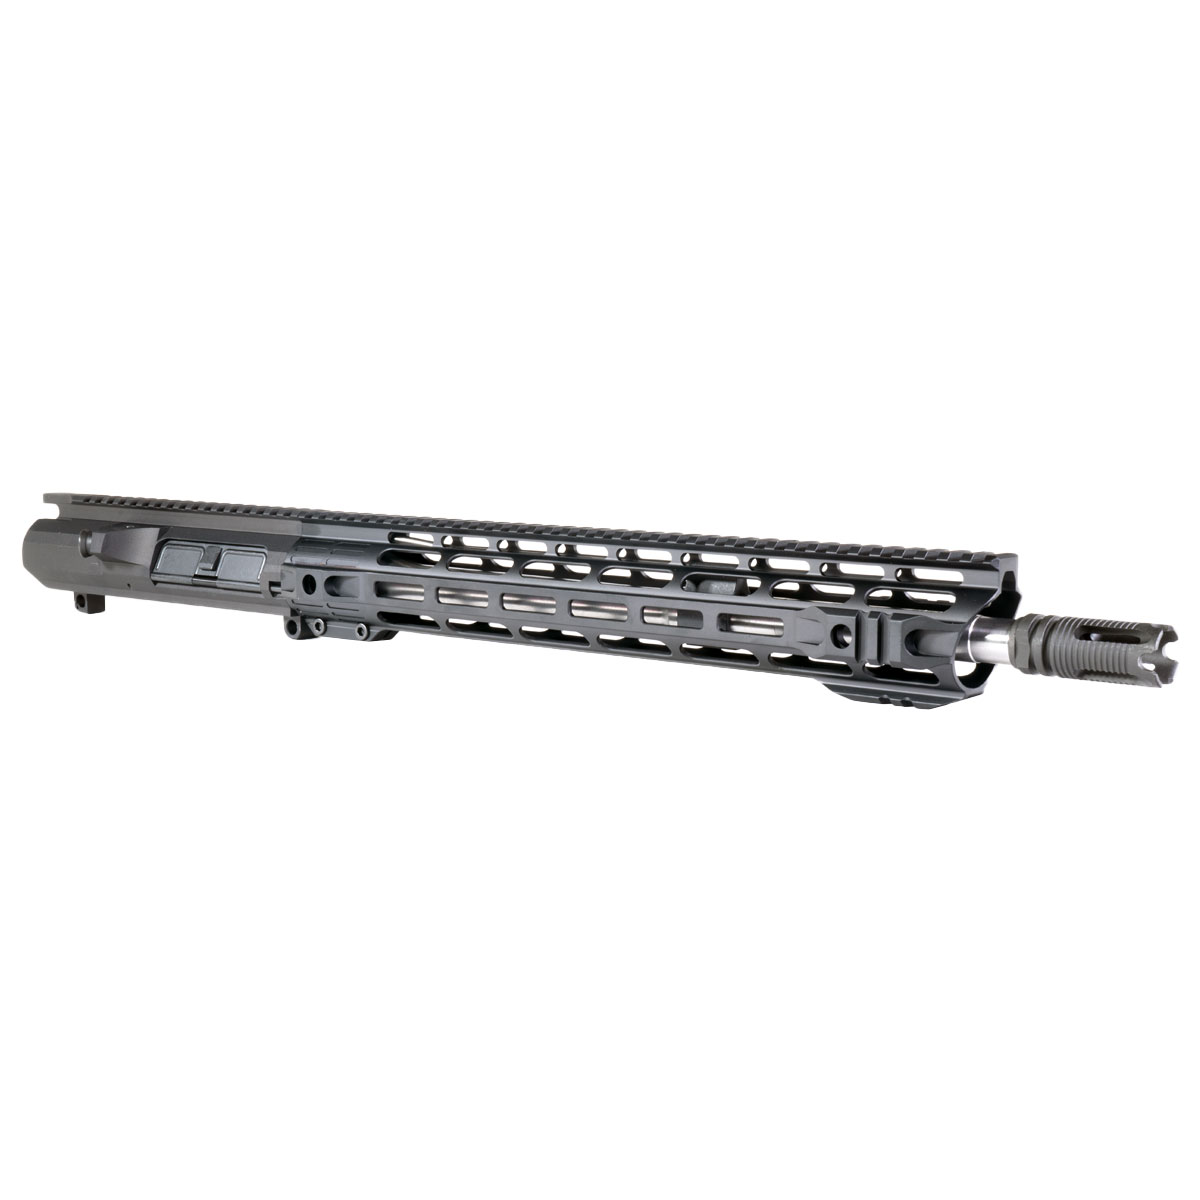 Davidson Defense 'Ironclad' 16-inch LR-308 .308 Win Stainless Rifle Upper Build Kit